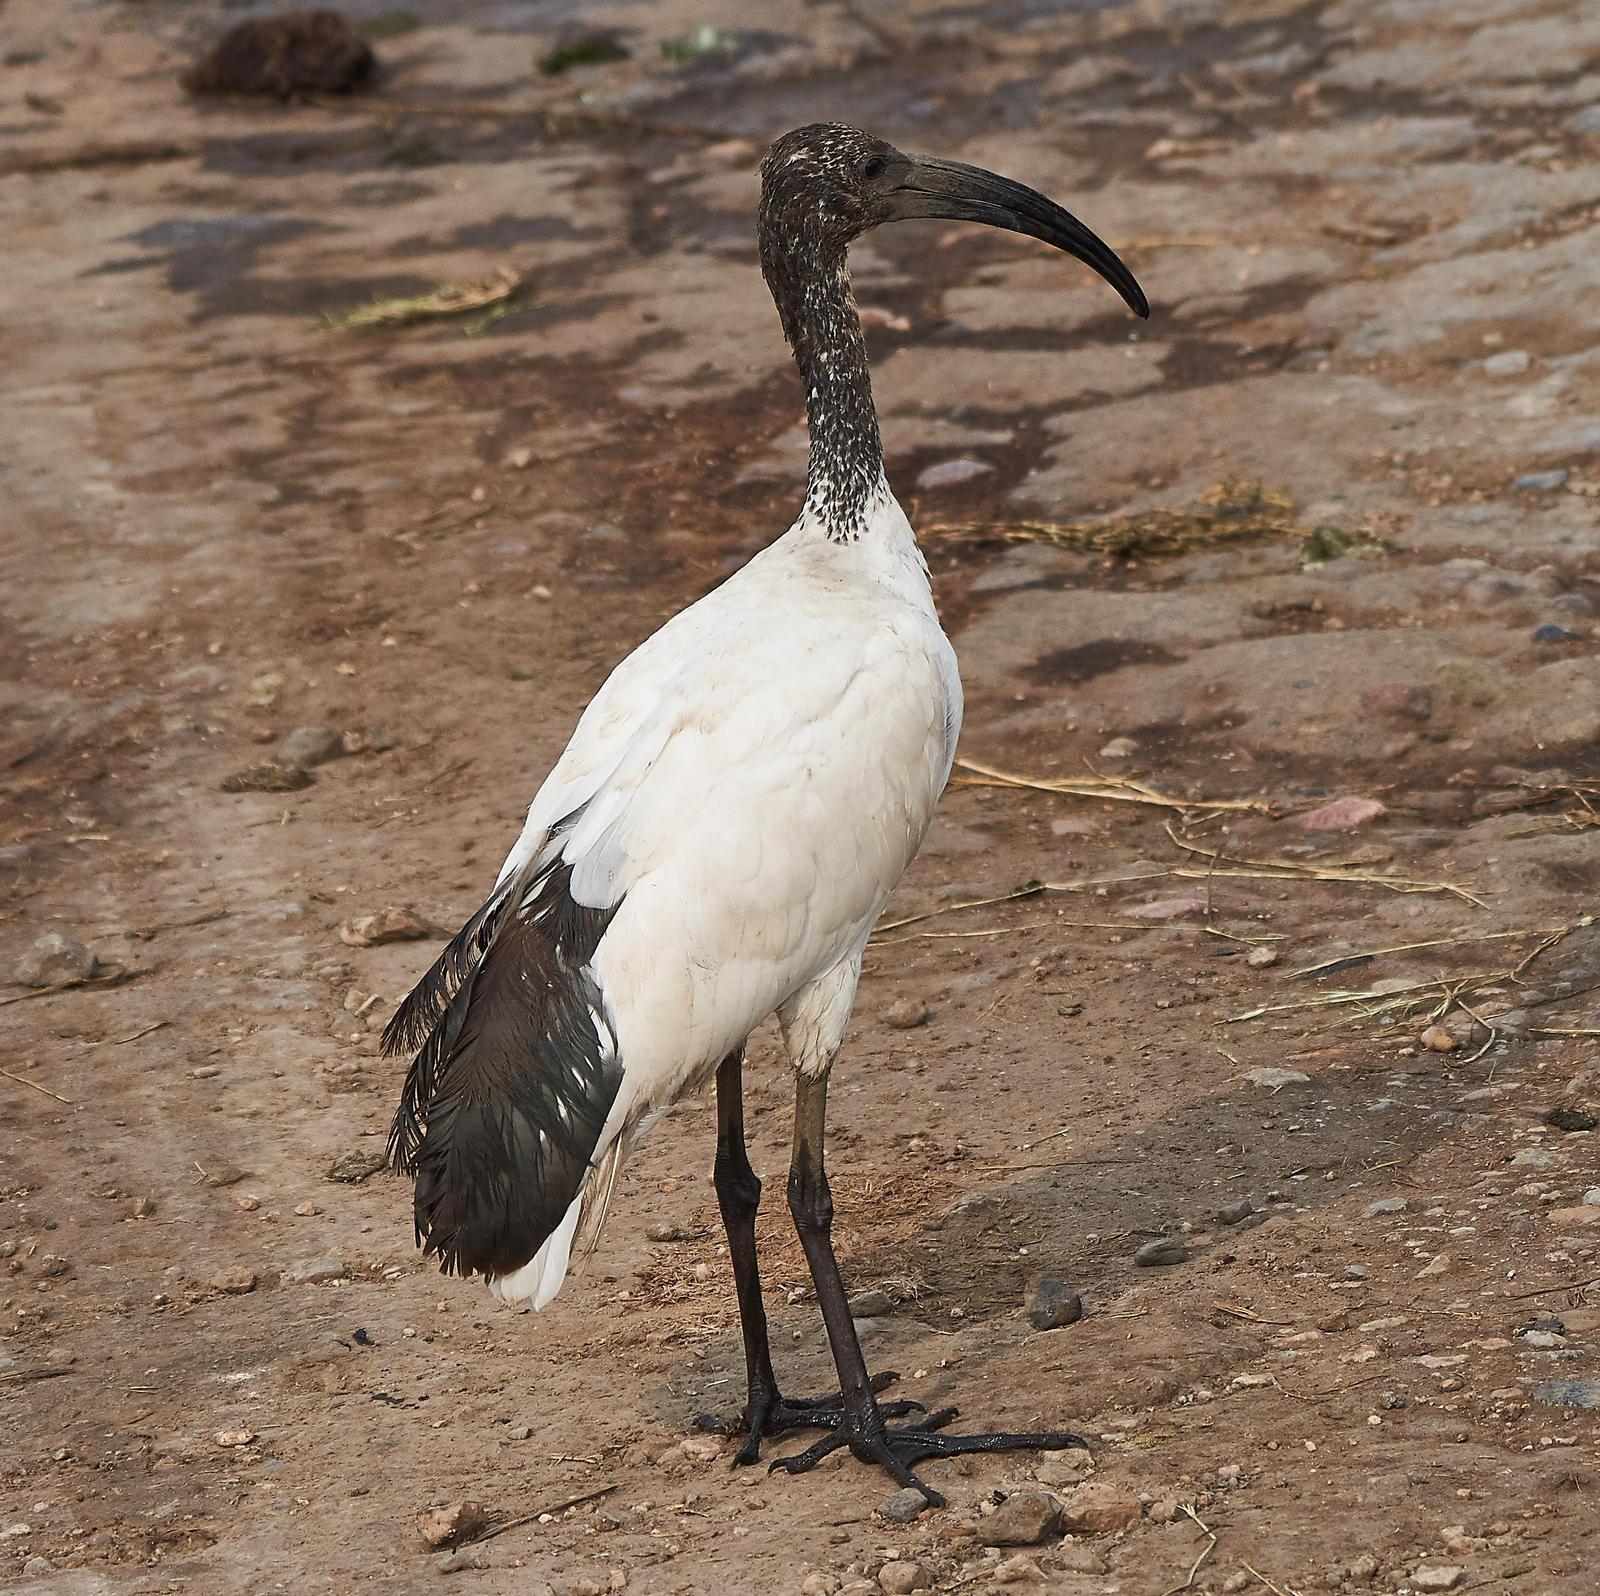 African/Madagascar Sacred Ibis Photo by Steven Cheong